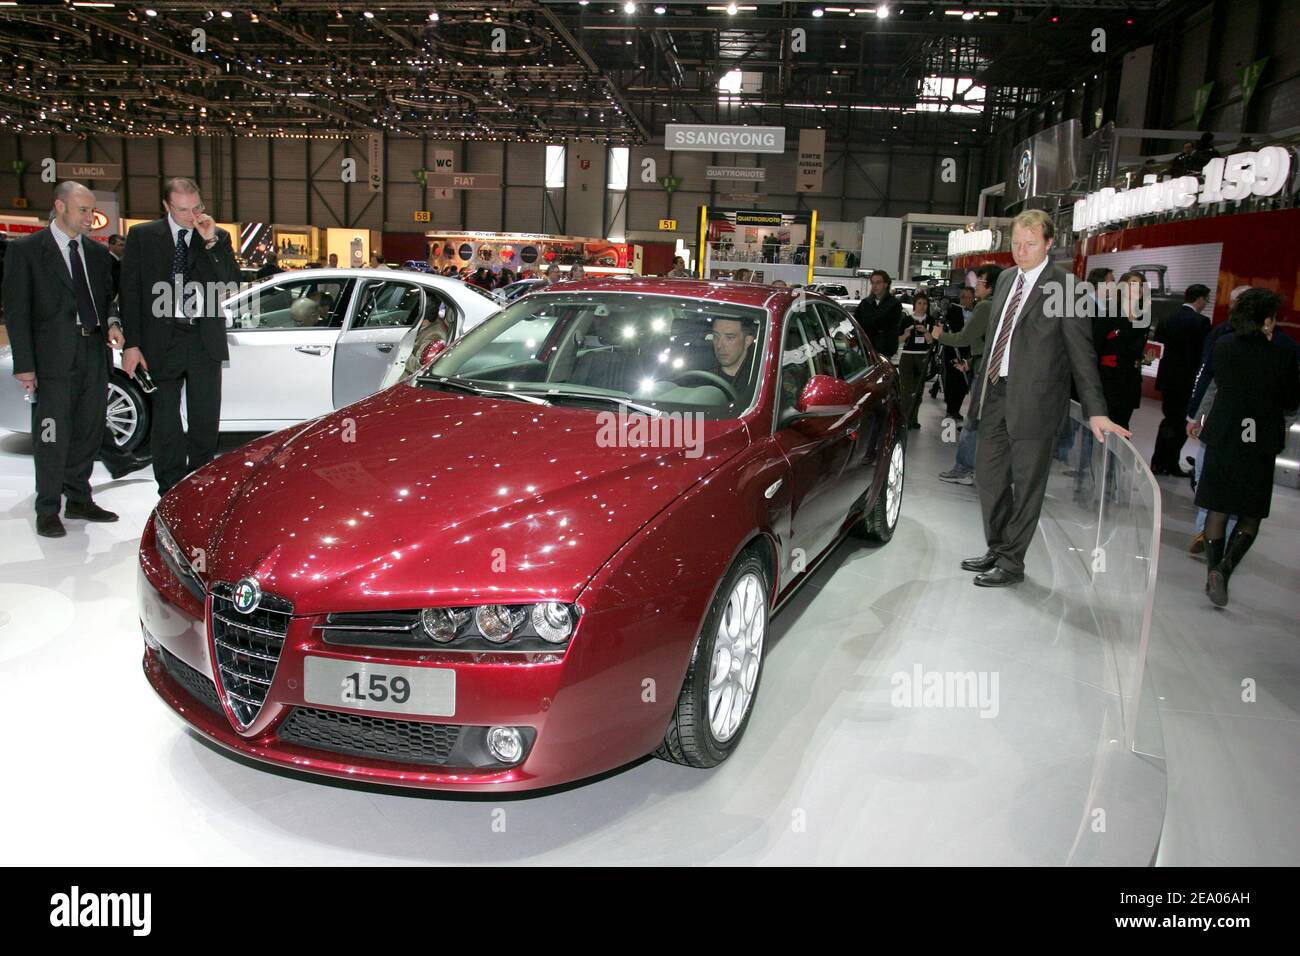 The new Alfa Romeo 159 is on display during its first world presentation at  the 75th Geneva motor show in Geneva, Switzerland, on March 2, 2005. Photo  by Laurent Zabulon/ABACA Stock Photo - Alamy